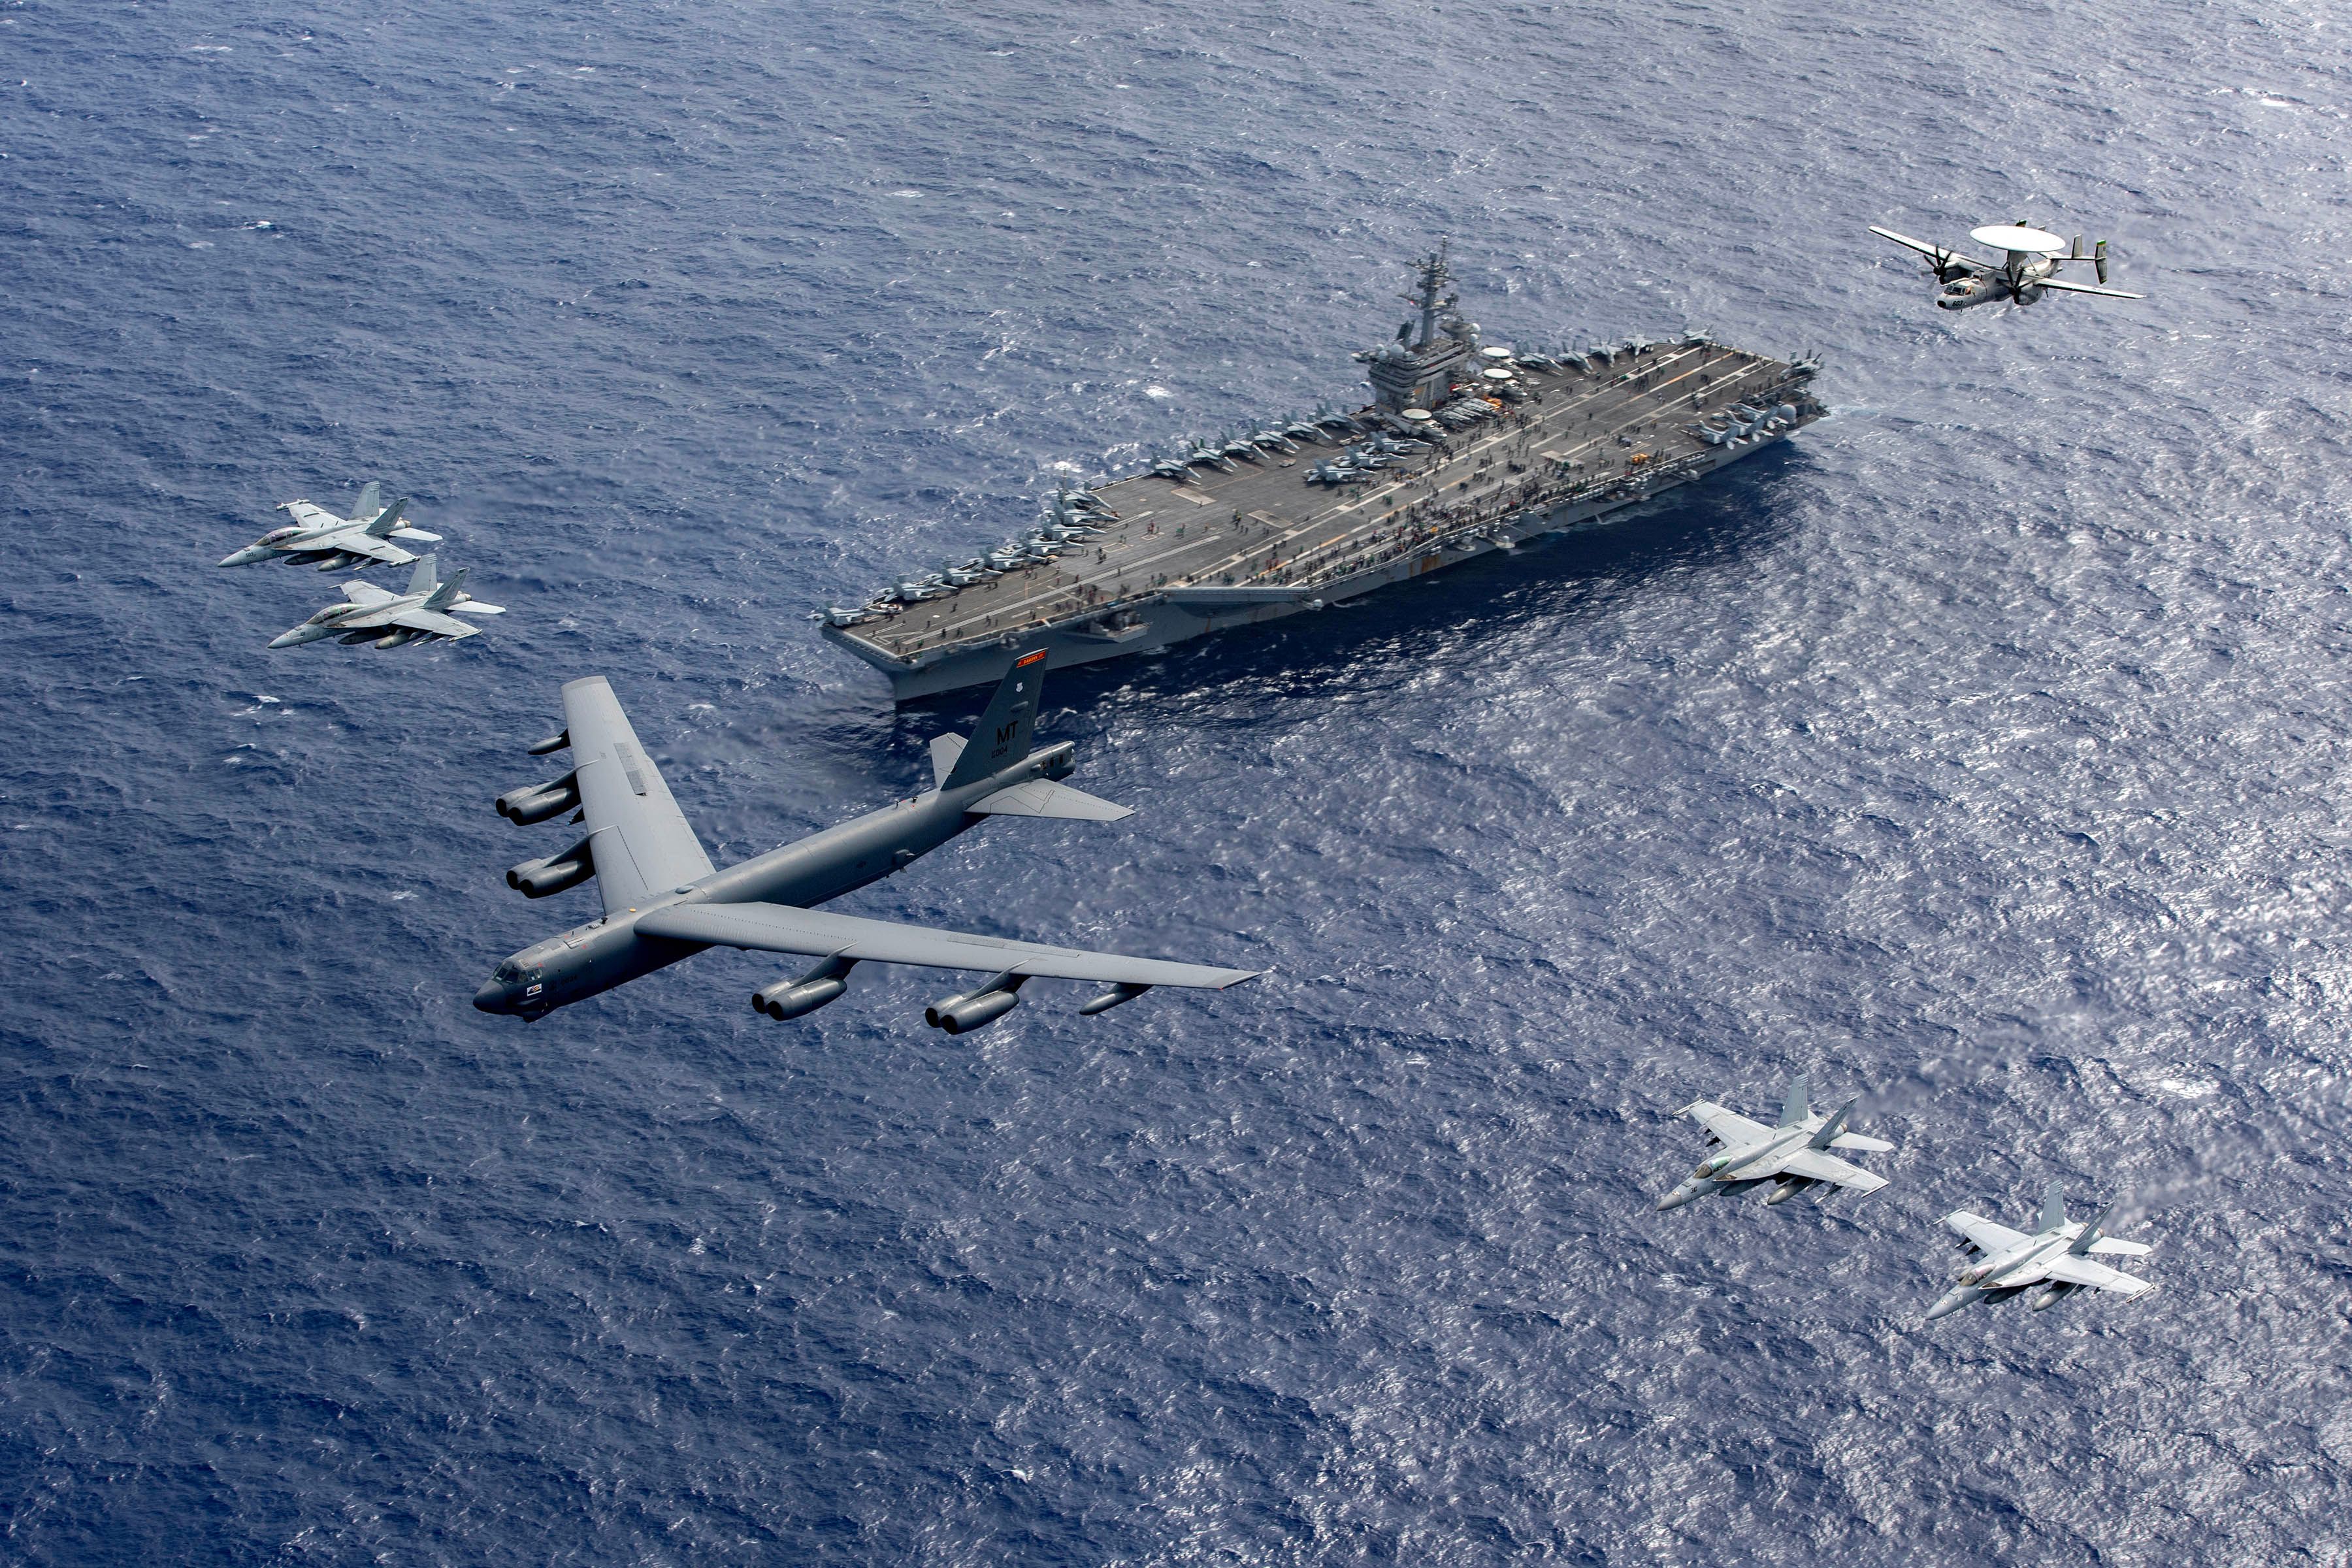 A Boeing B-52 Stratofortress being escorted by F-18 Super Hornets and an E-2 Hawkeye.